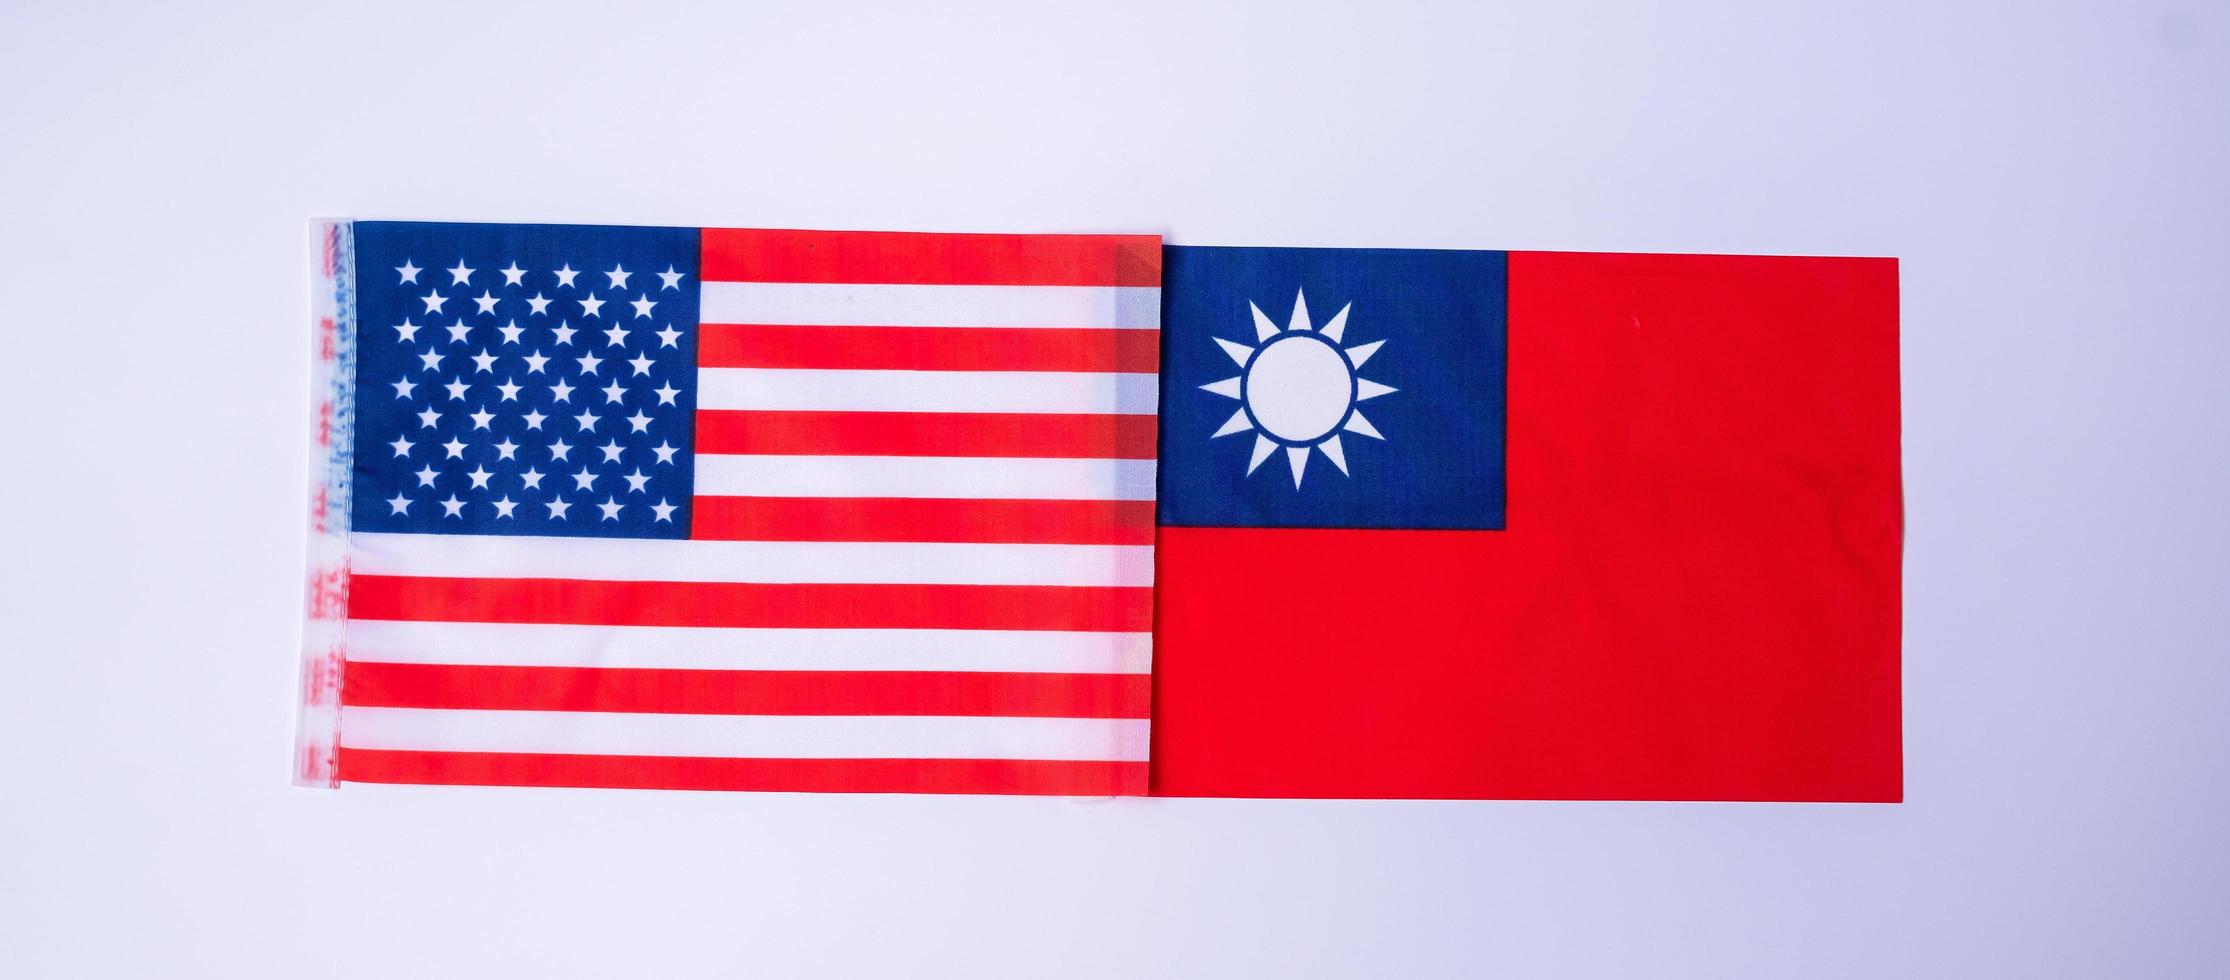 America against Taiwan flags. freindship, war, conflict, Politics and relationship concept photo